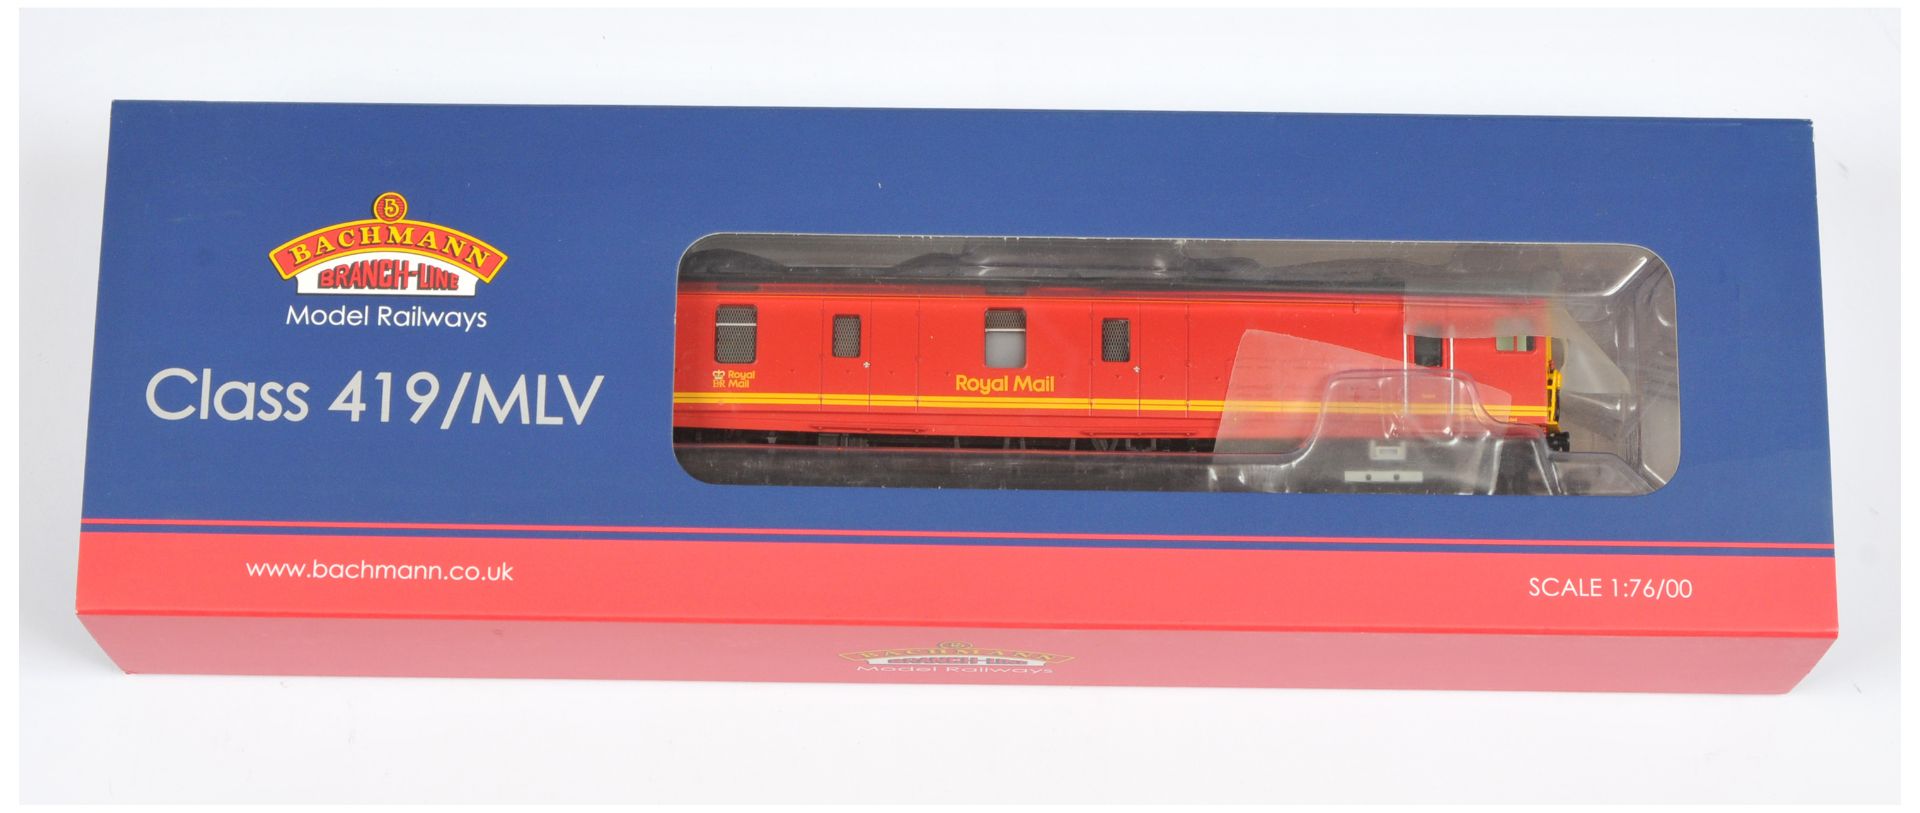 Bachmann OO Gauge 31-265K (Limited Edition) Class 419 Motor Luggage Van No. 68004 "Royal Mail", p...